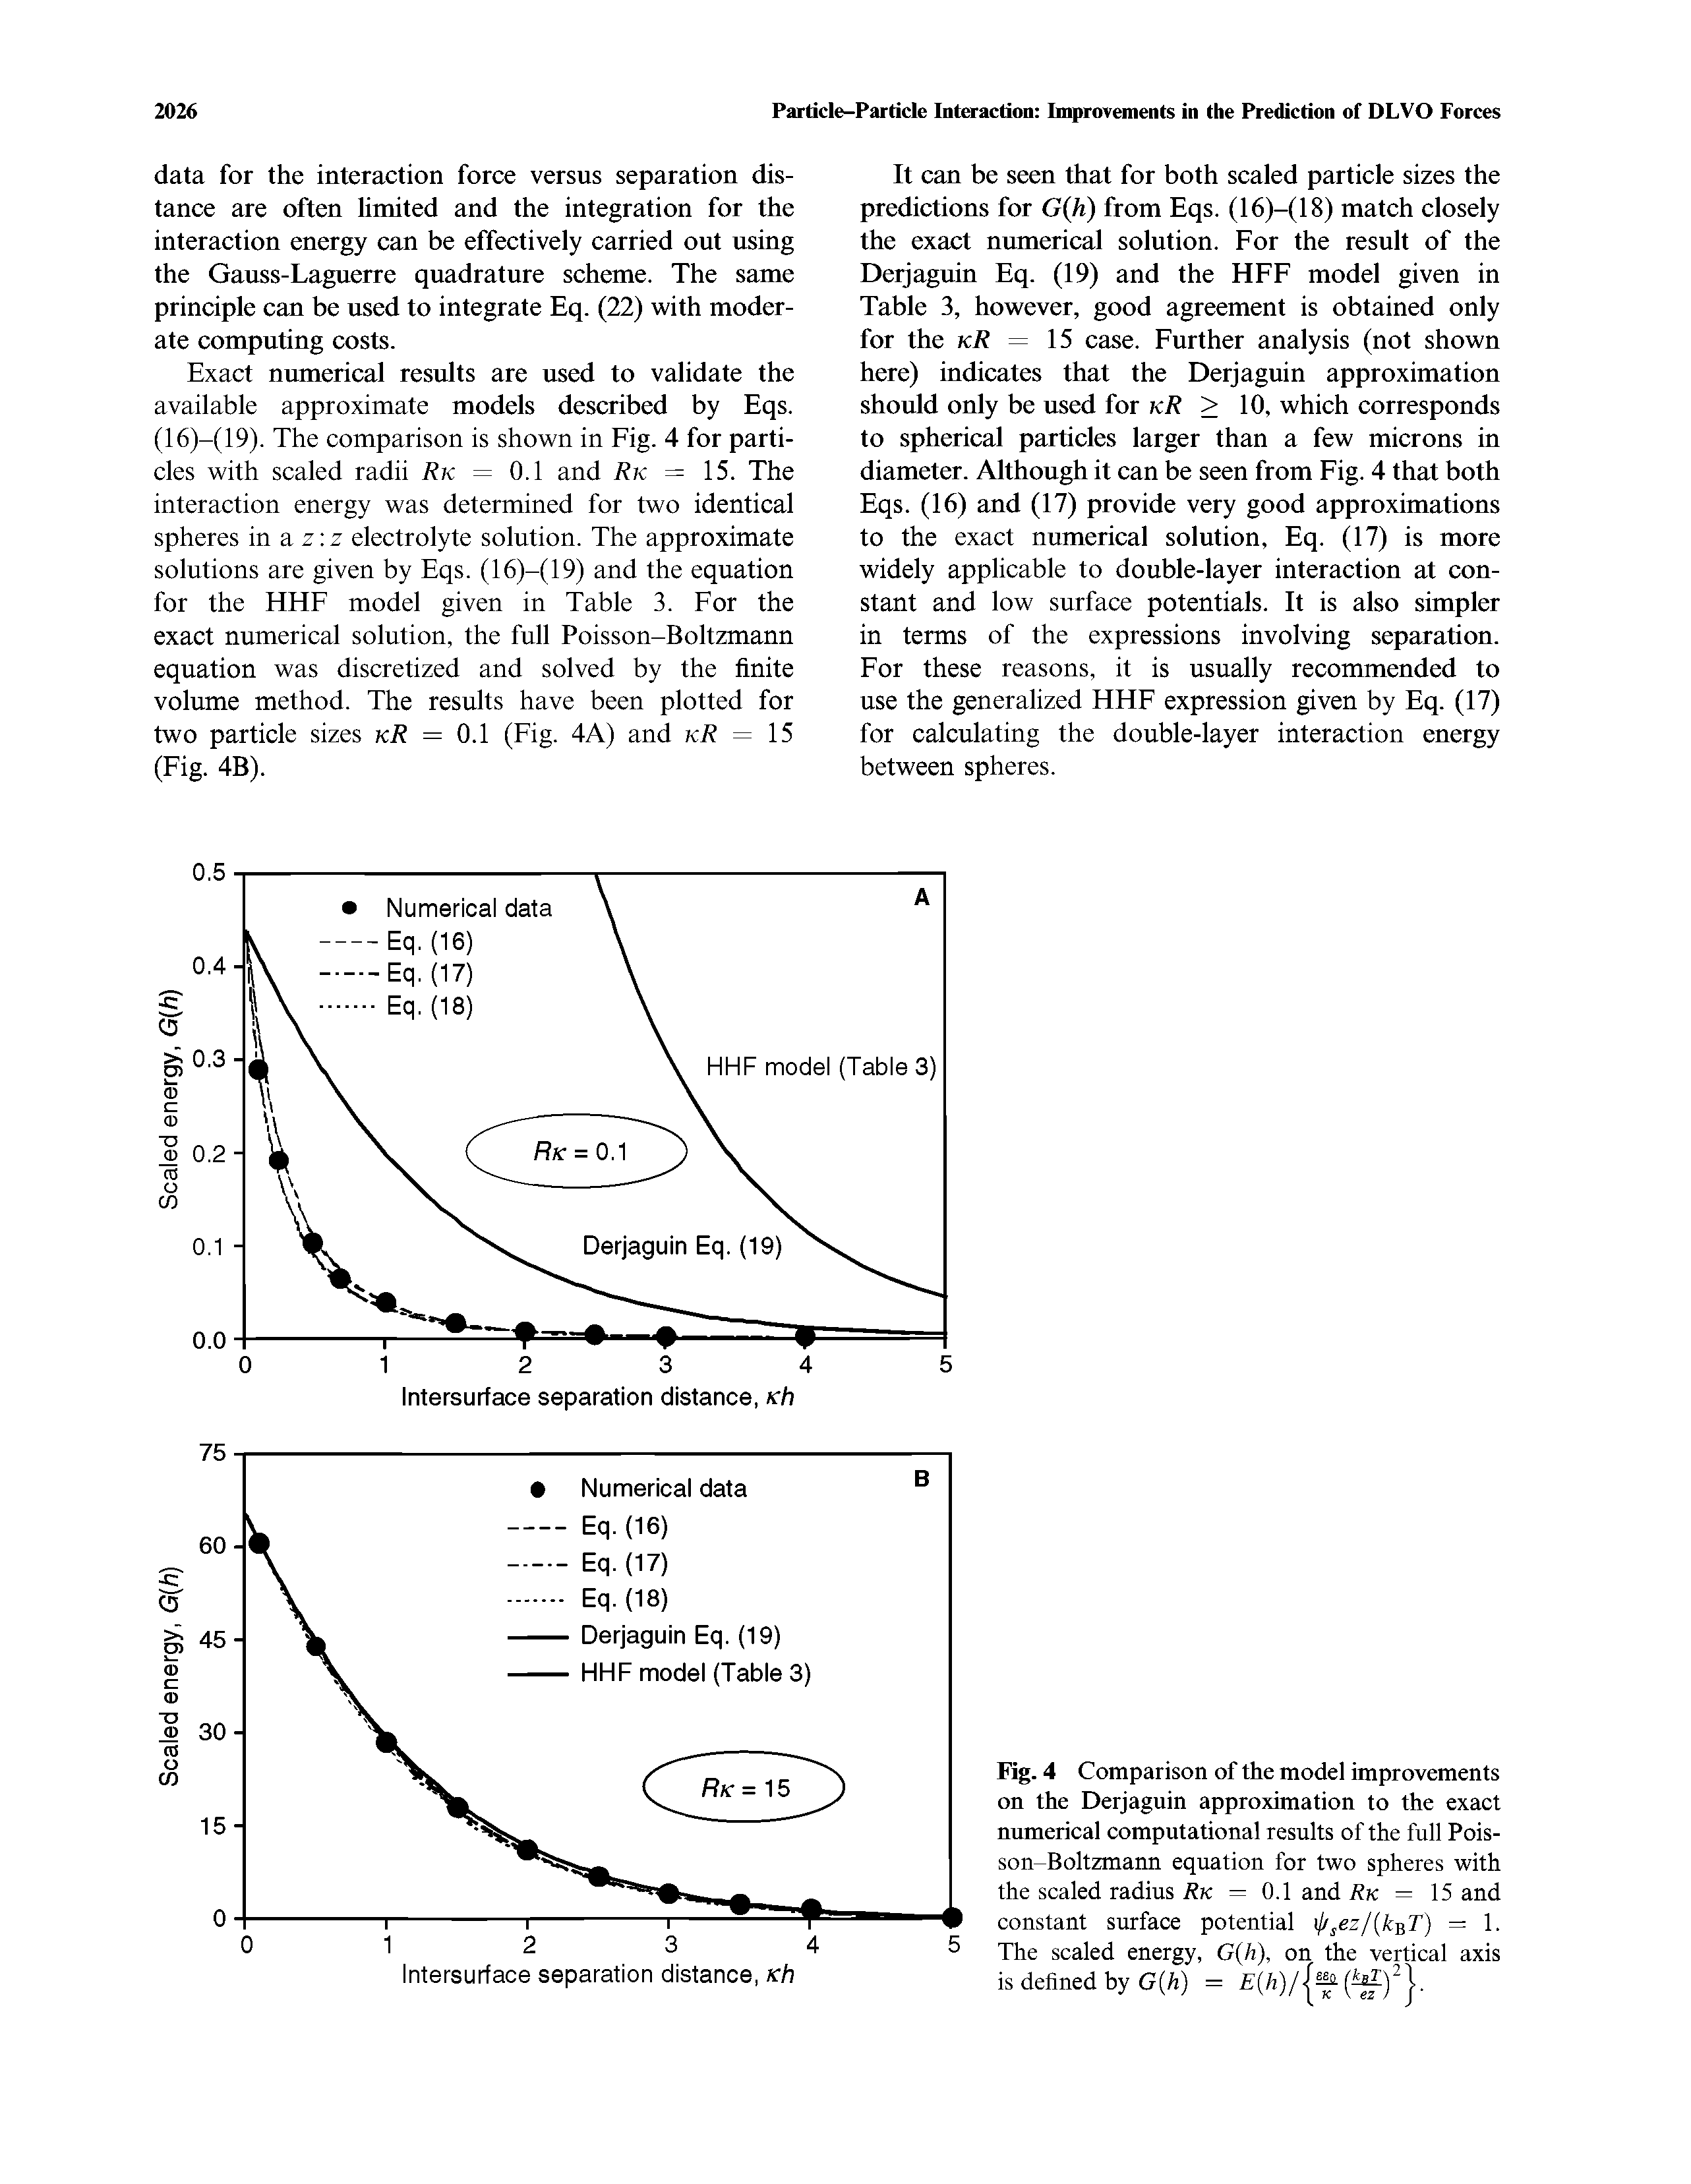 Fig. 4 Comparison of the model improvements on the Derjaguin approximation to the exact numerical computational results of the full Poisson-Boltzmann equation for two spheres with the scaled radius Rk — 0.1 and Rk — 15 and constant surface potential [j/ ez/(k-gT) = 1. The scaled energy, G h), on the vertical axis is defined by G(h) = (/,)/jsM...